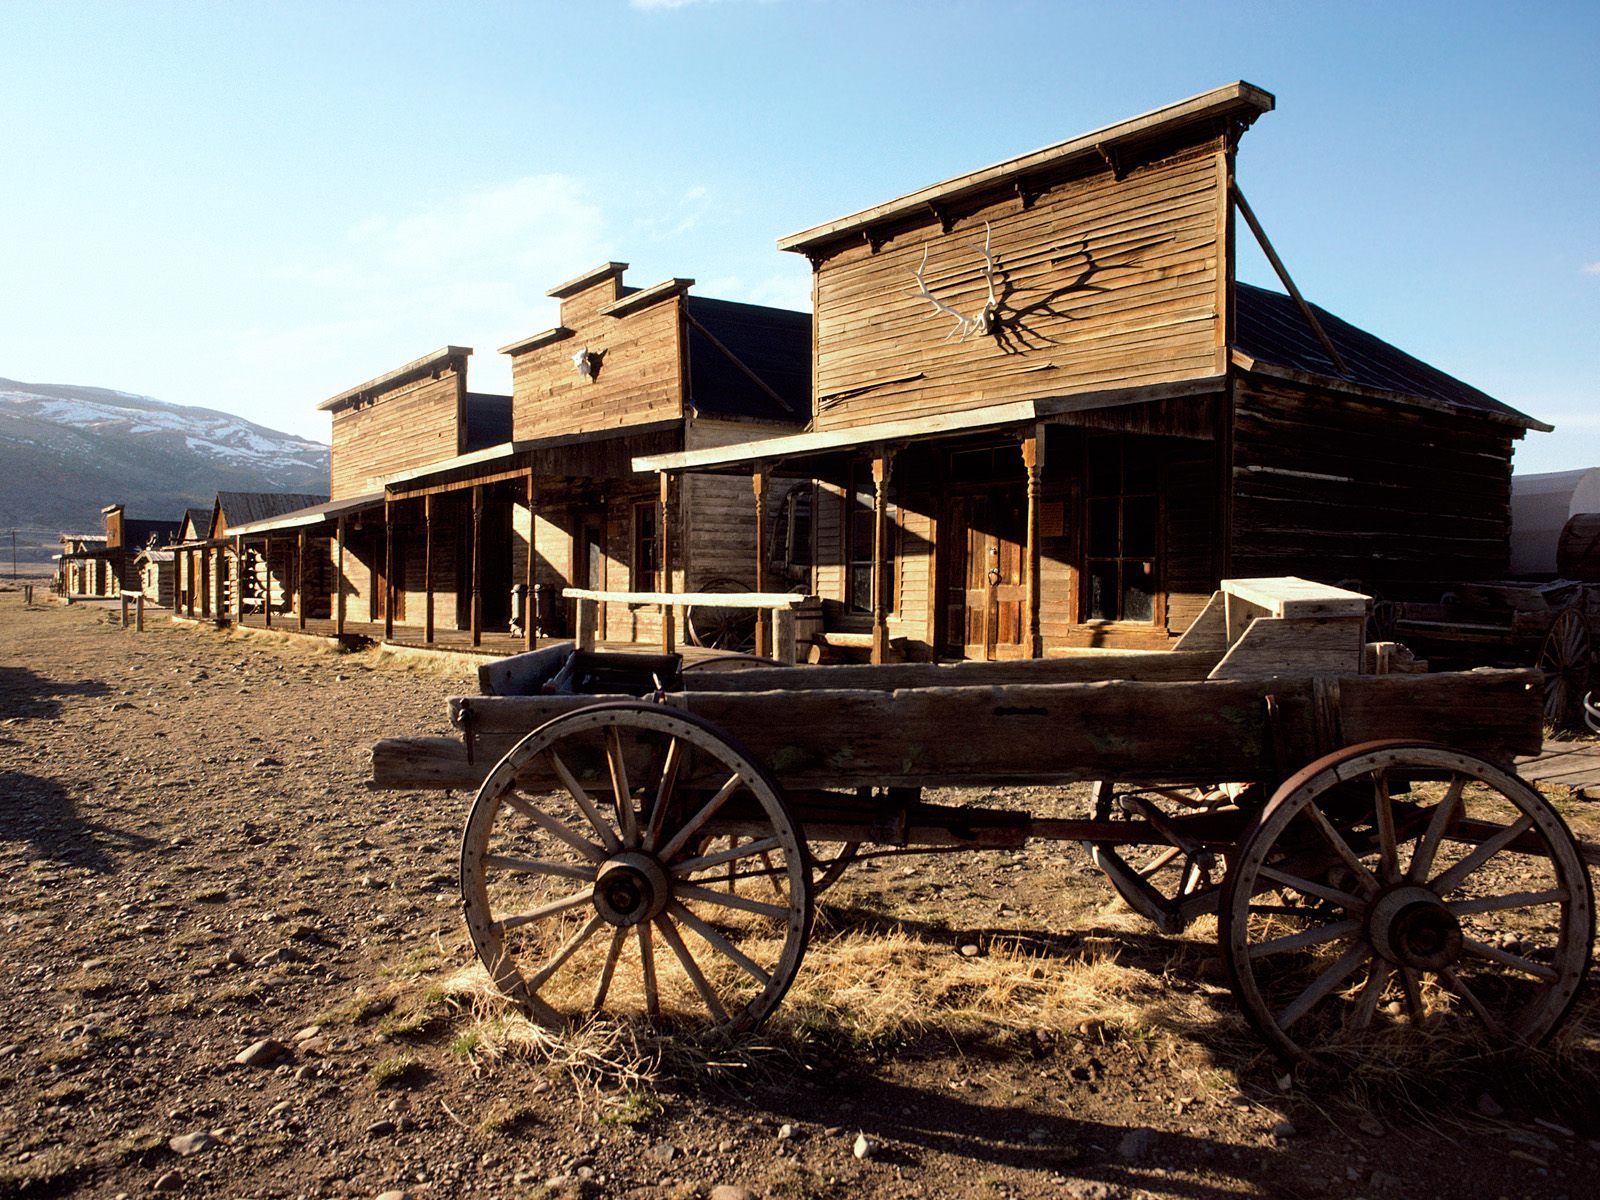 Unusual Holiday Gift Idea: Buy A Ghost Town